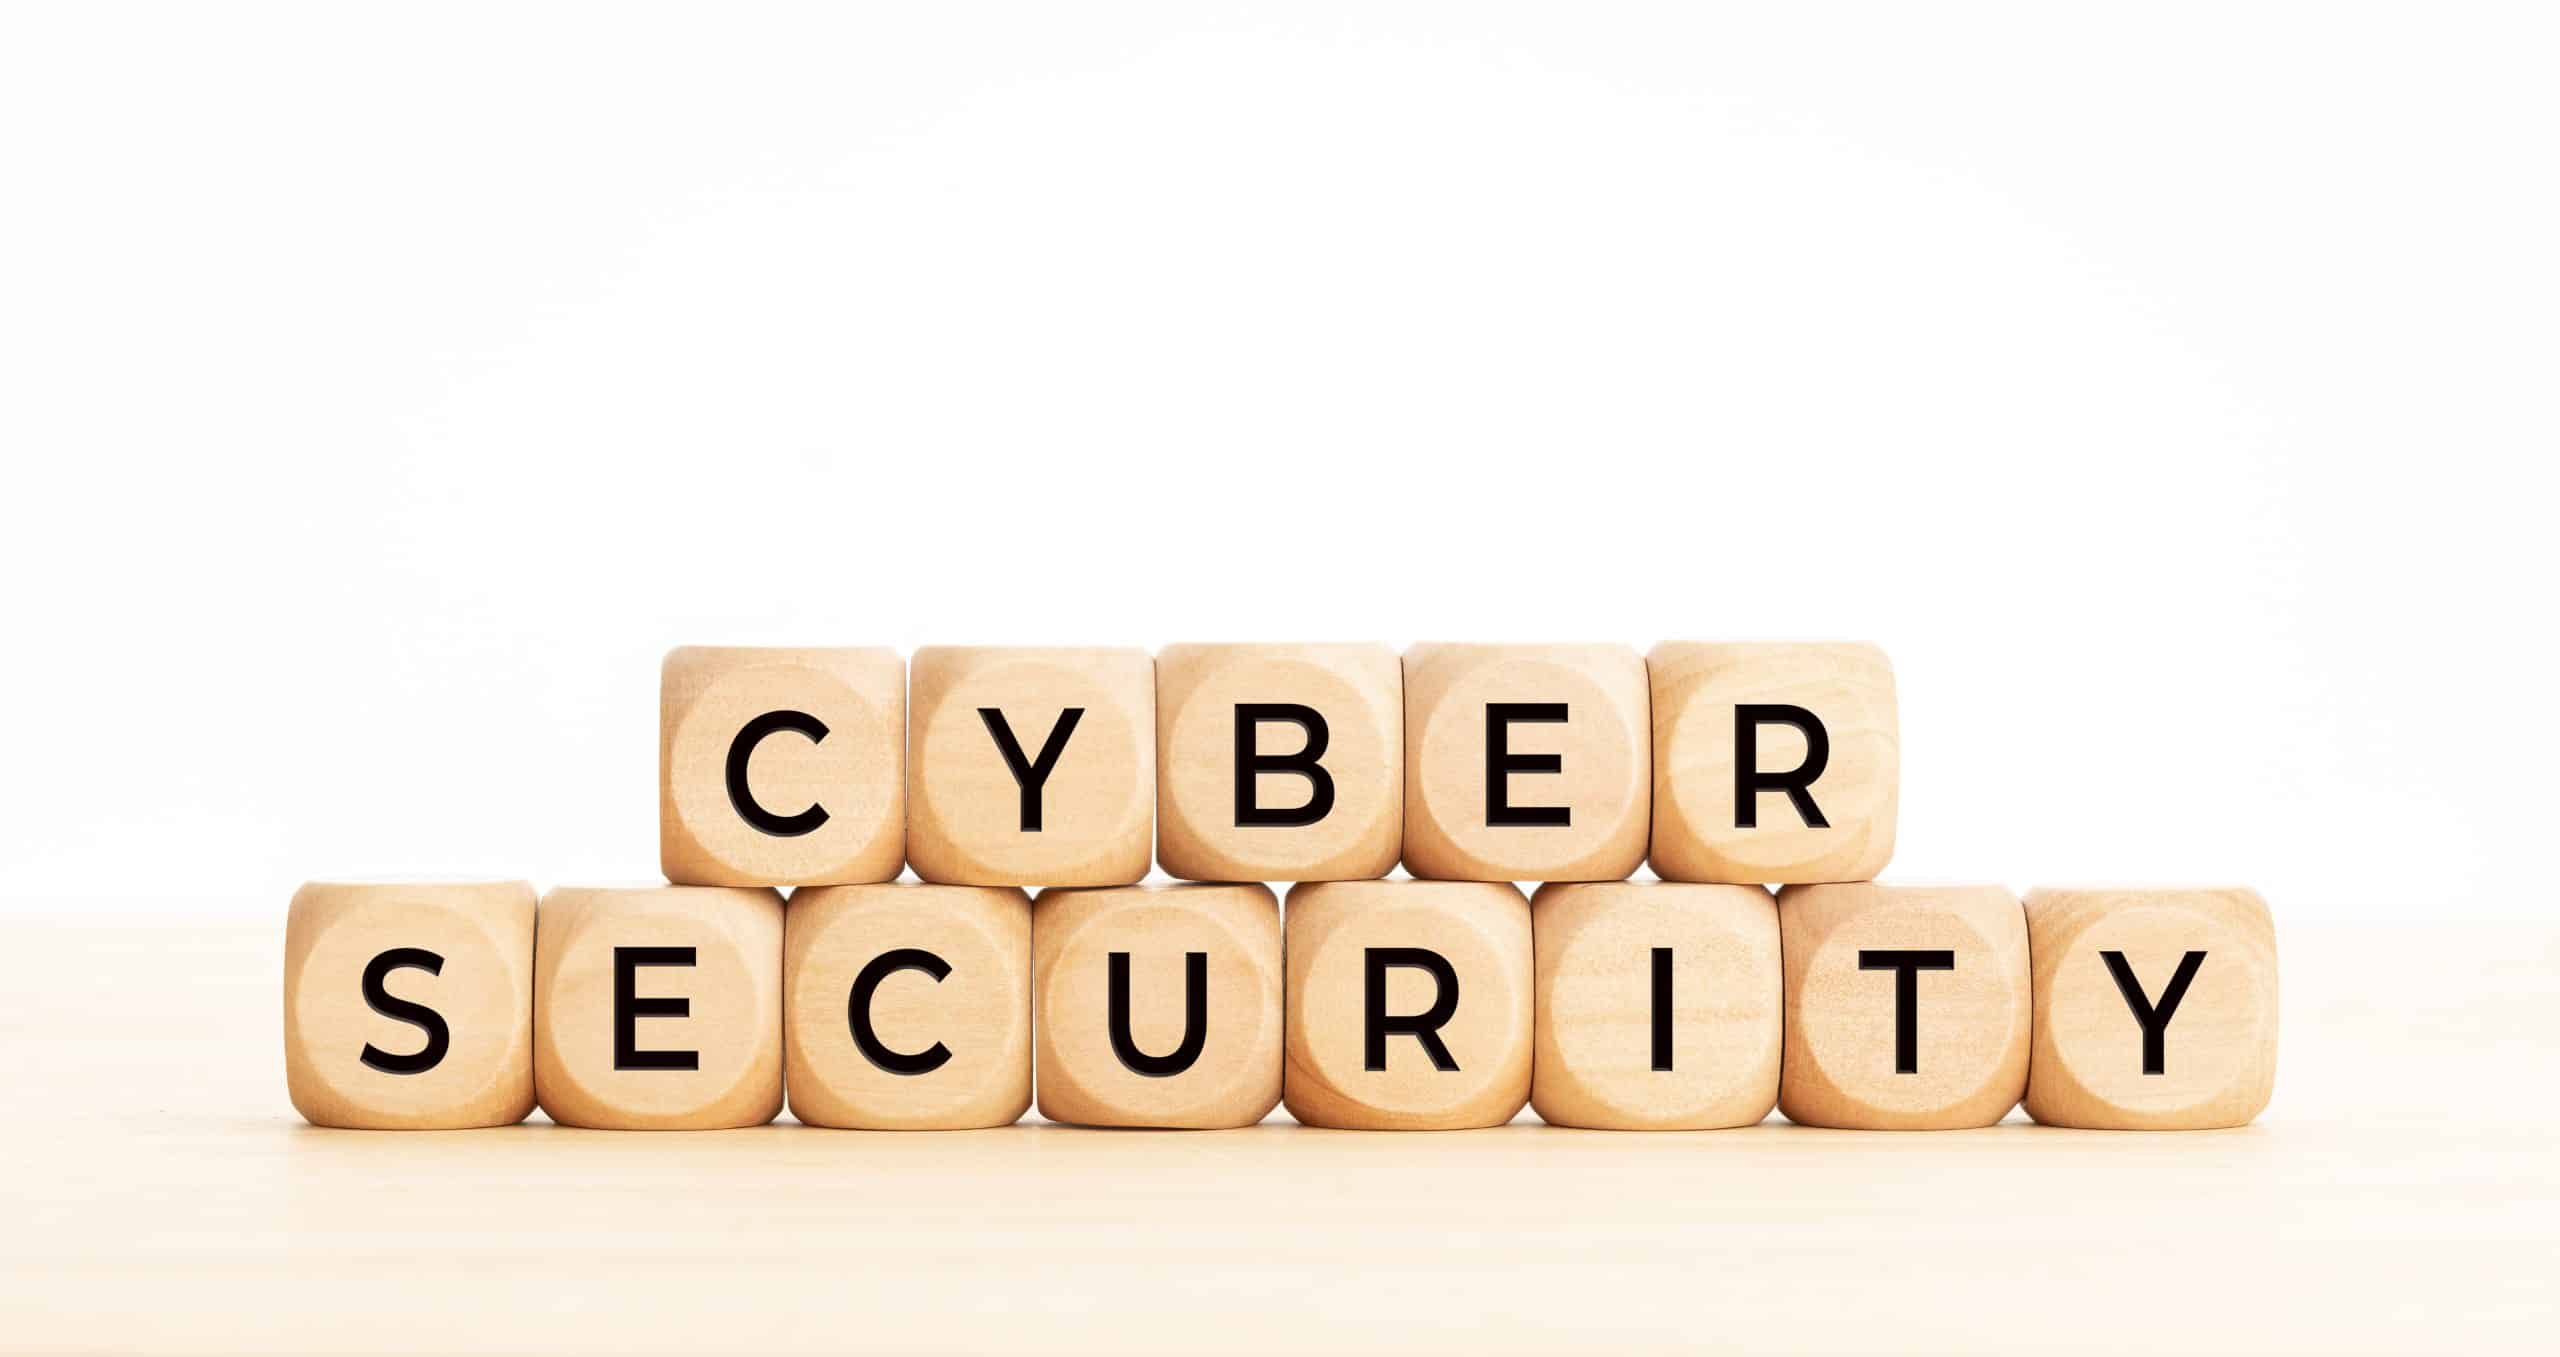 Cyber Security words on wooden block. Copy space. White background